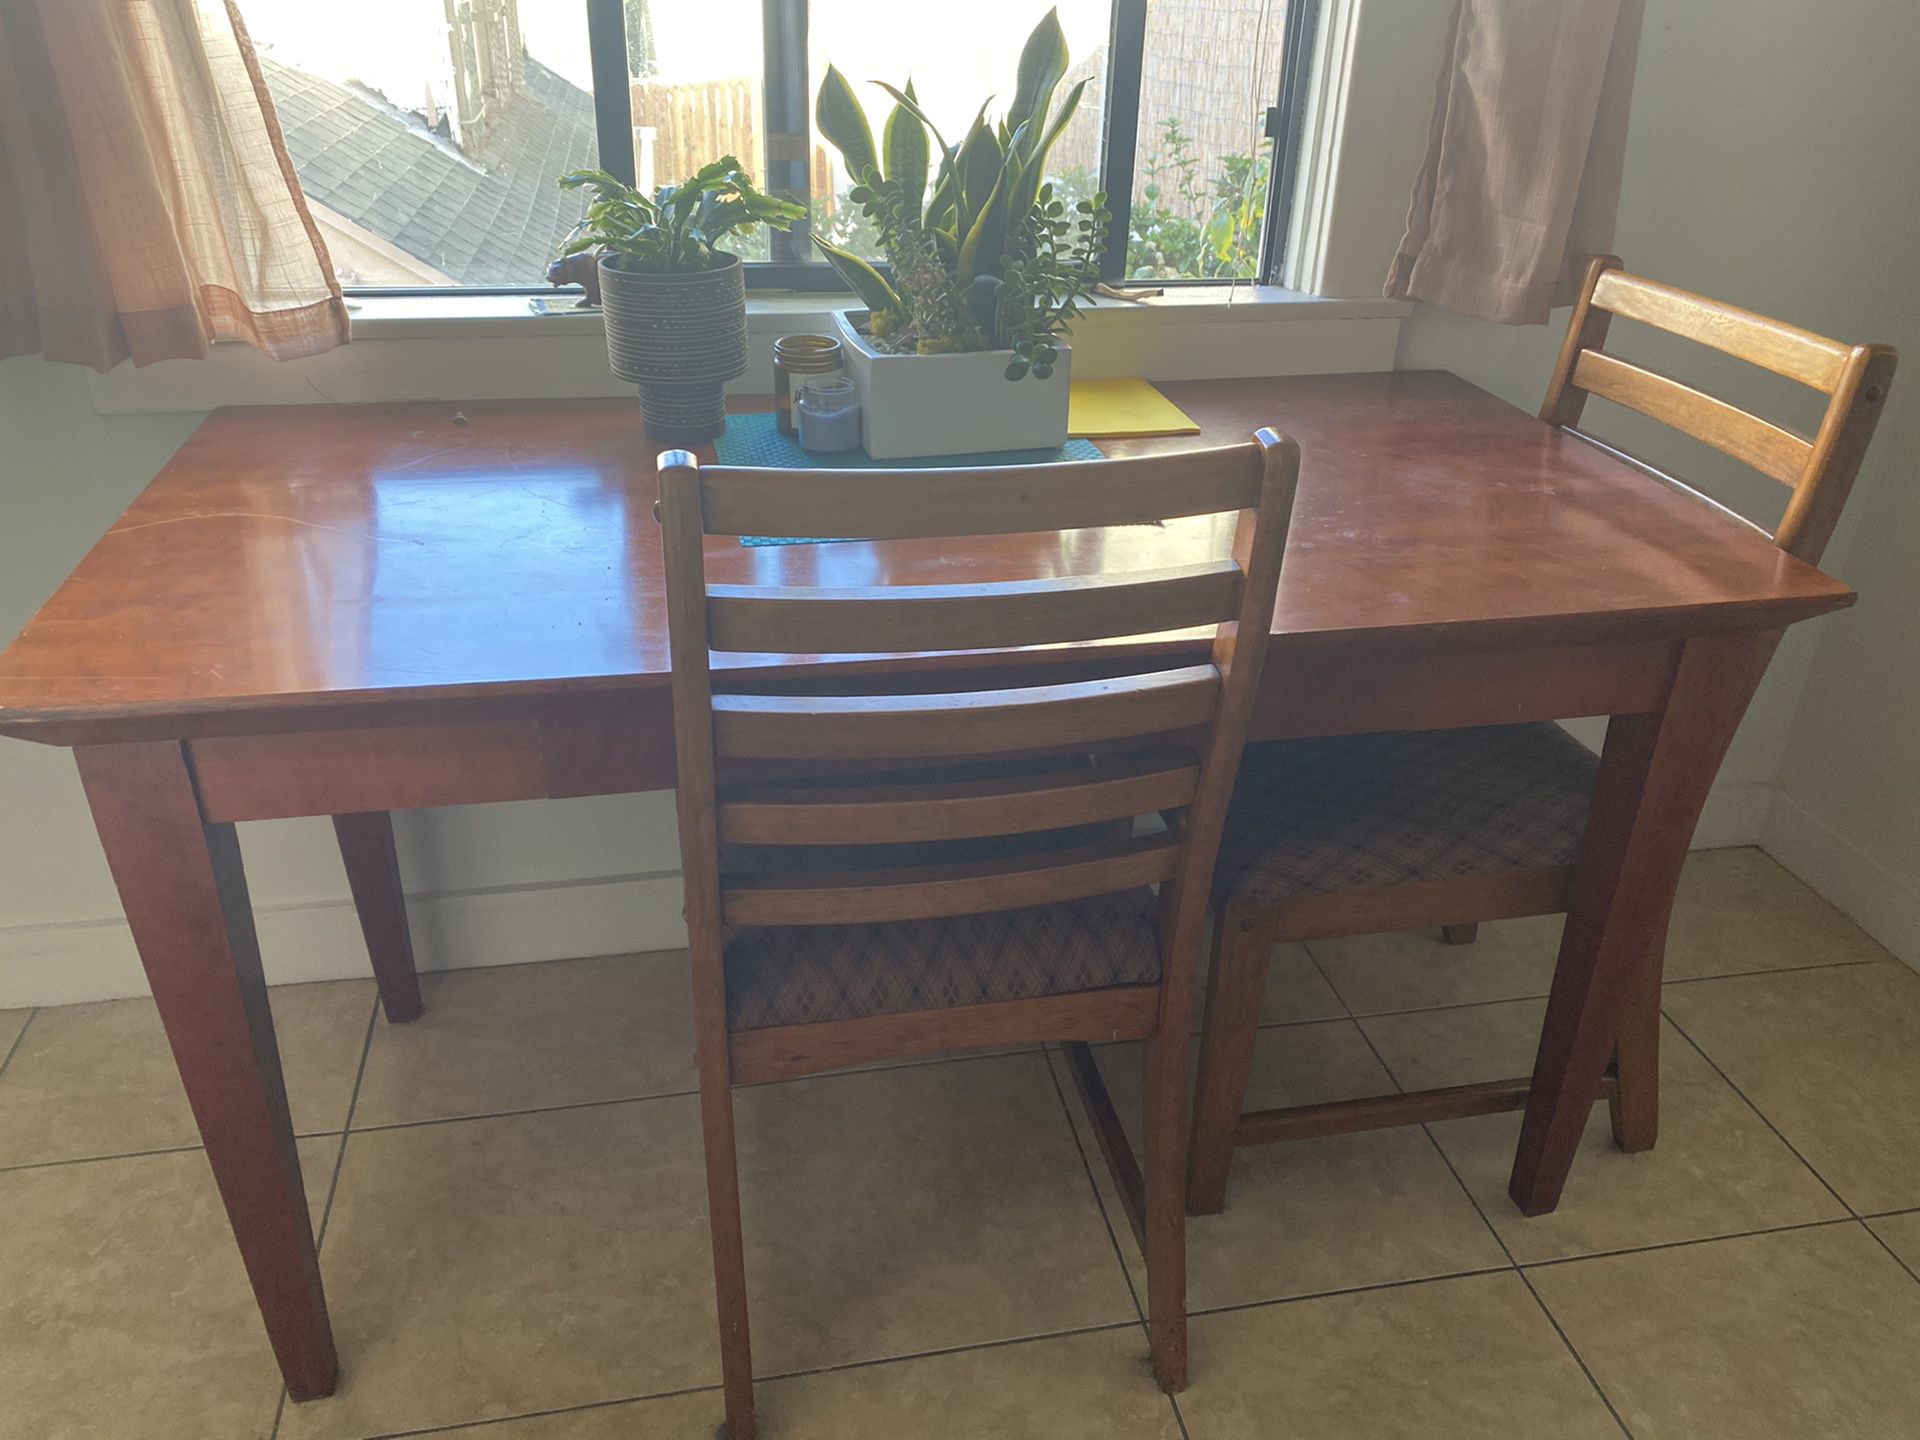 Sturdy kitchen/dining table + 4 chairs